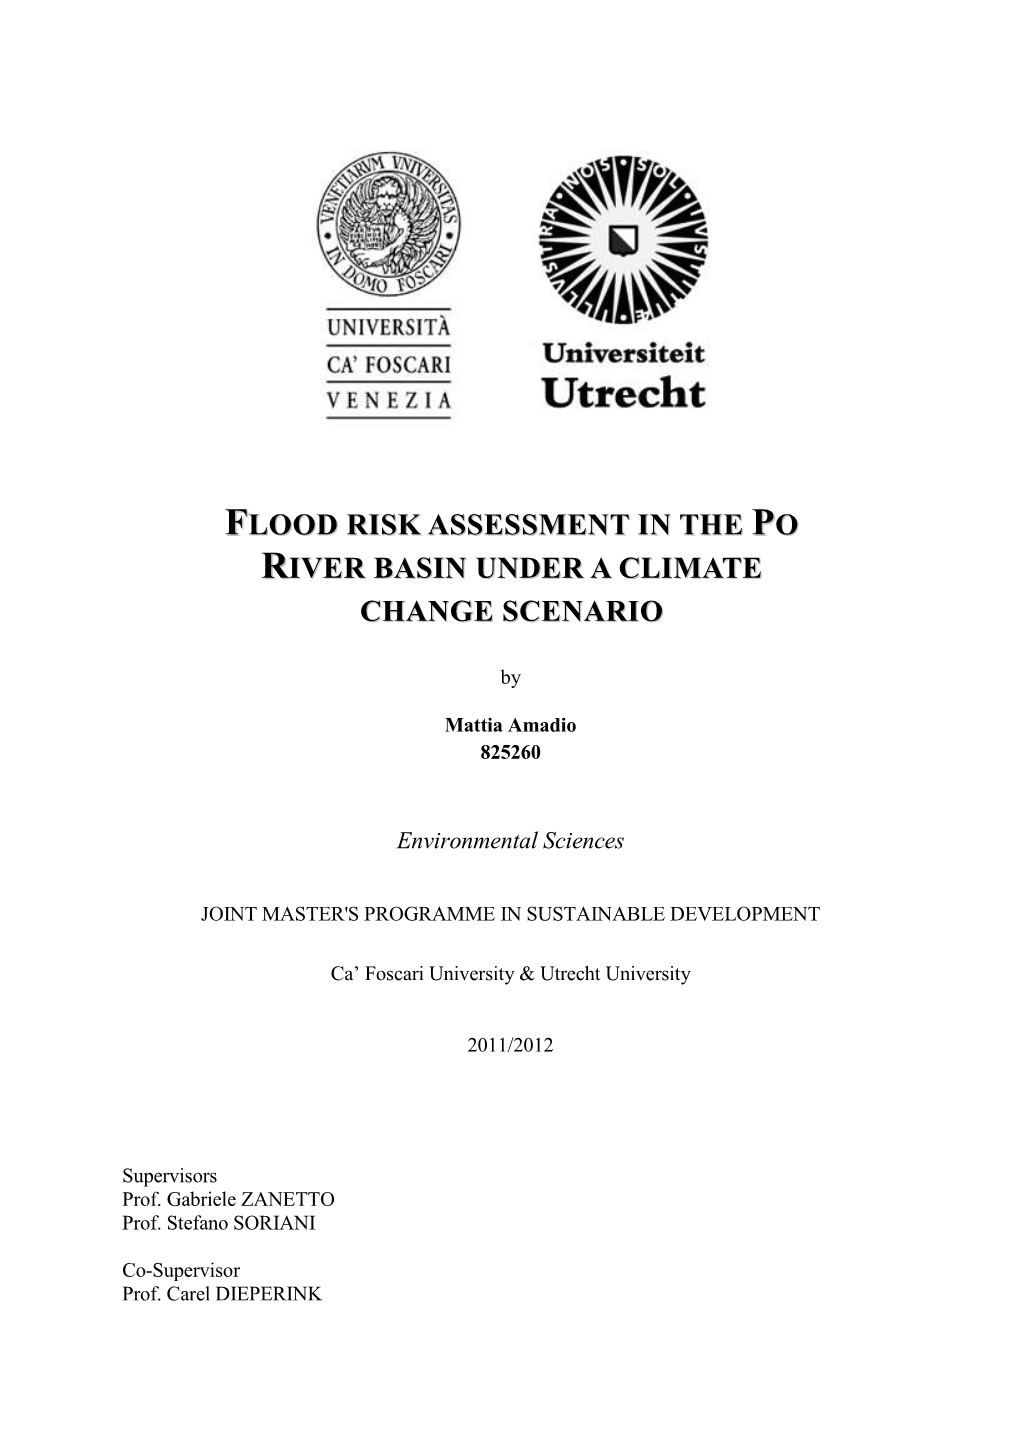 Flood Risk Assessment in the Po River Basin Under a Climate Change Scenario